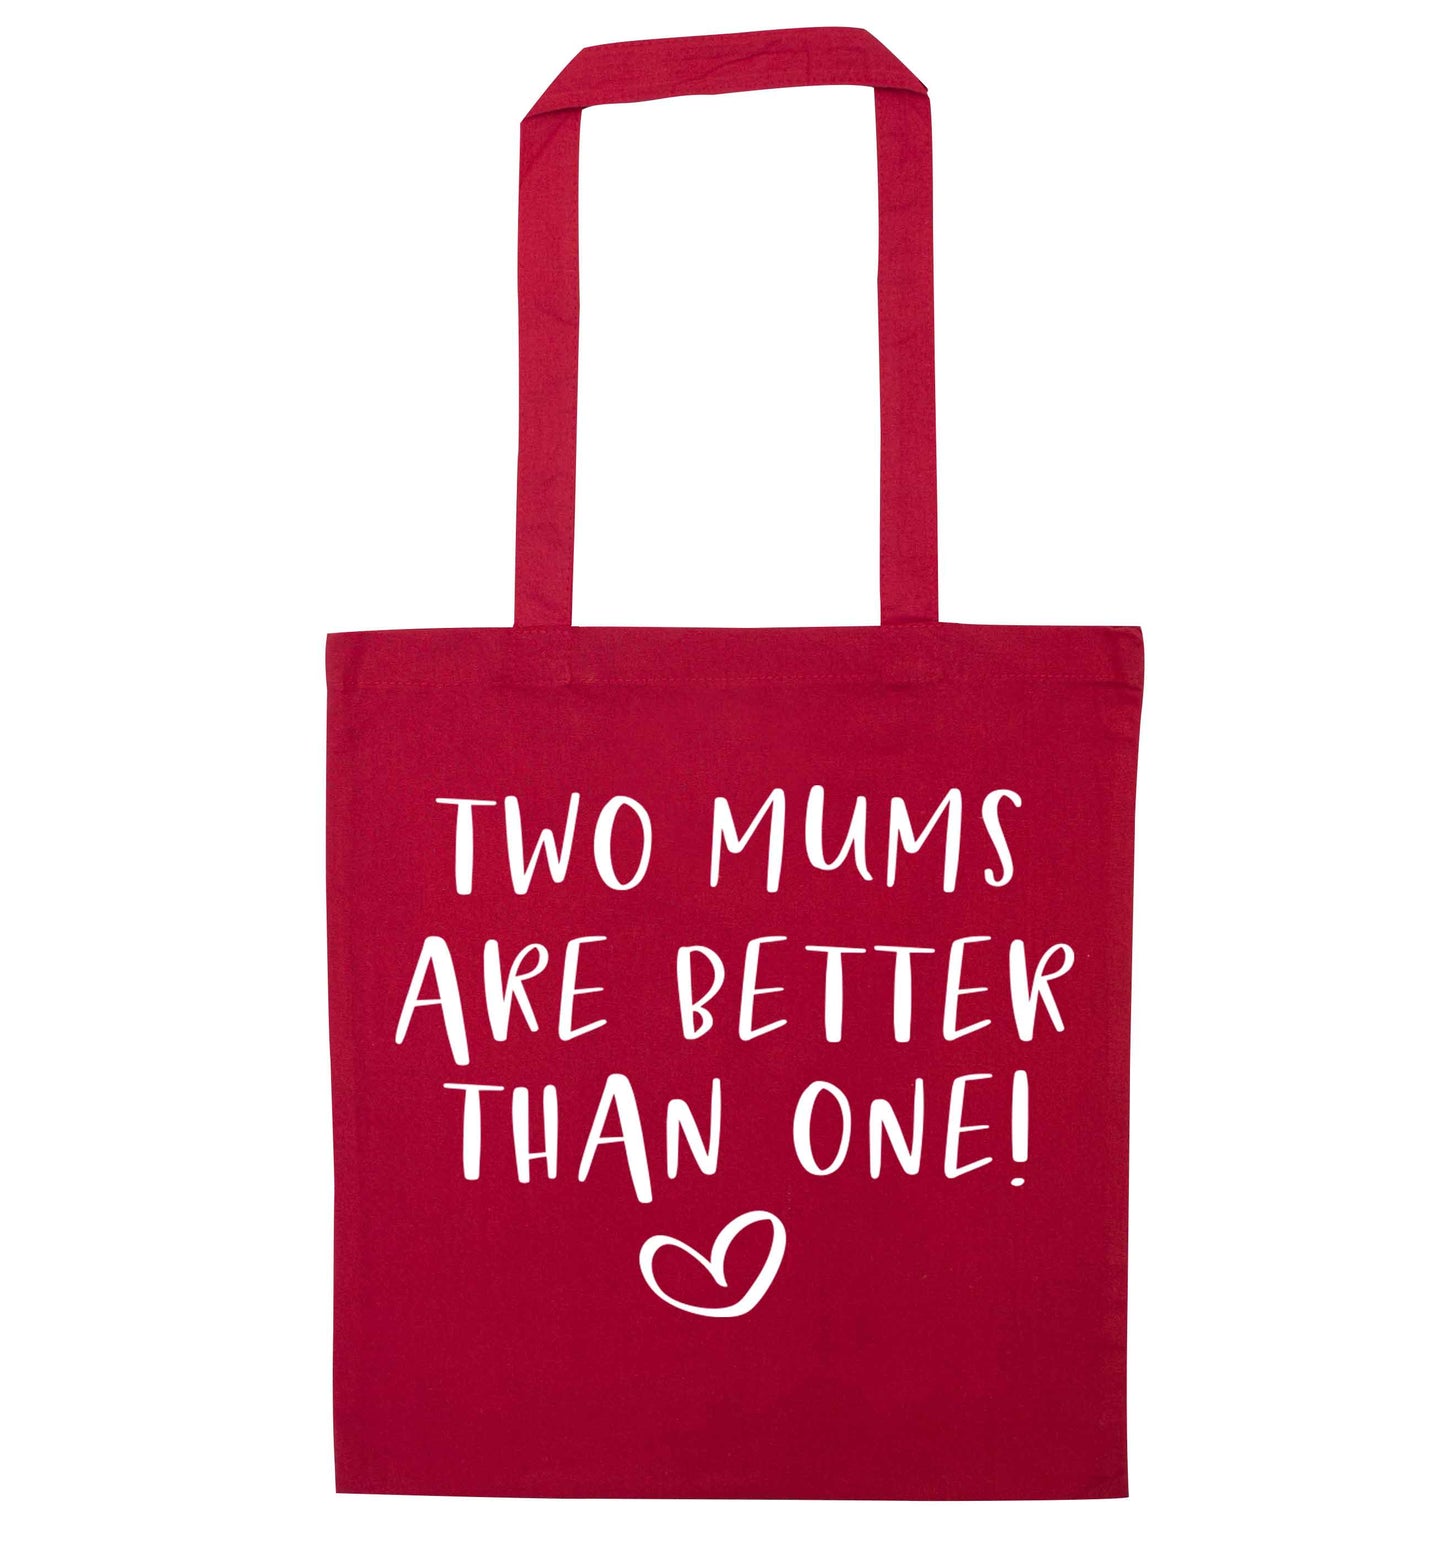 Two mums are better than one red tote bag